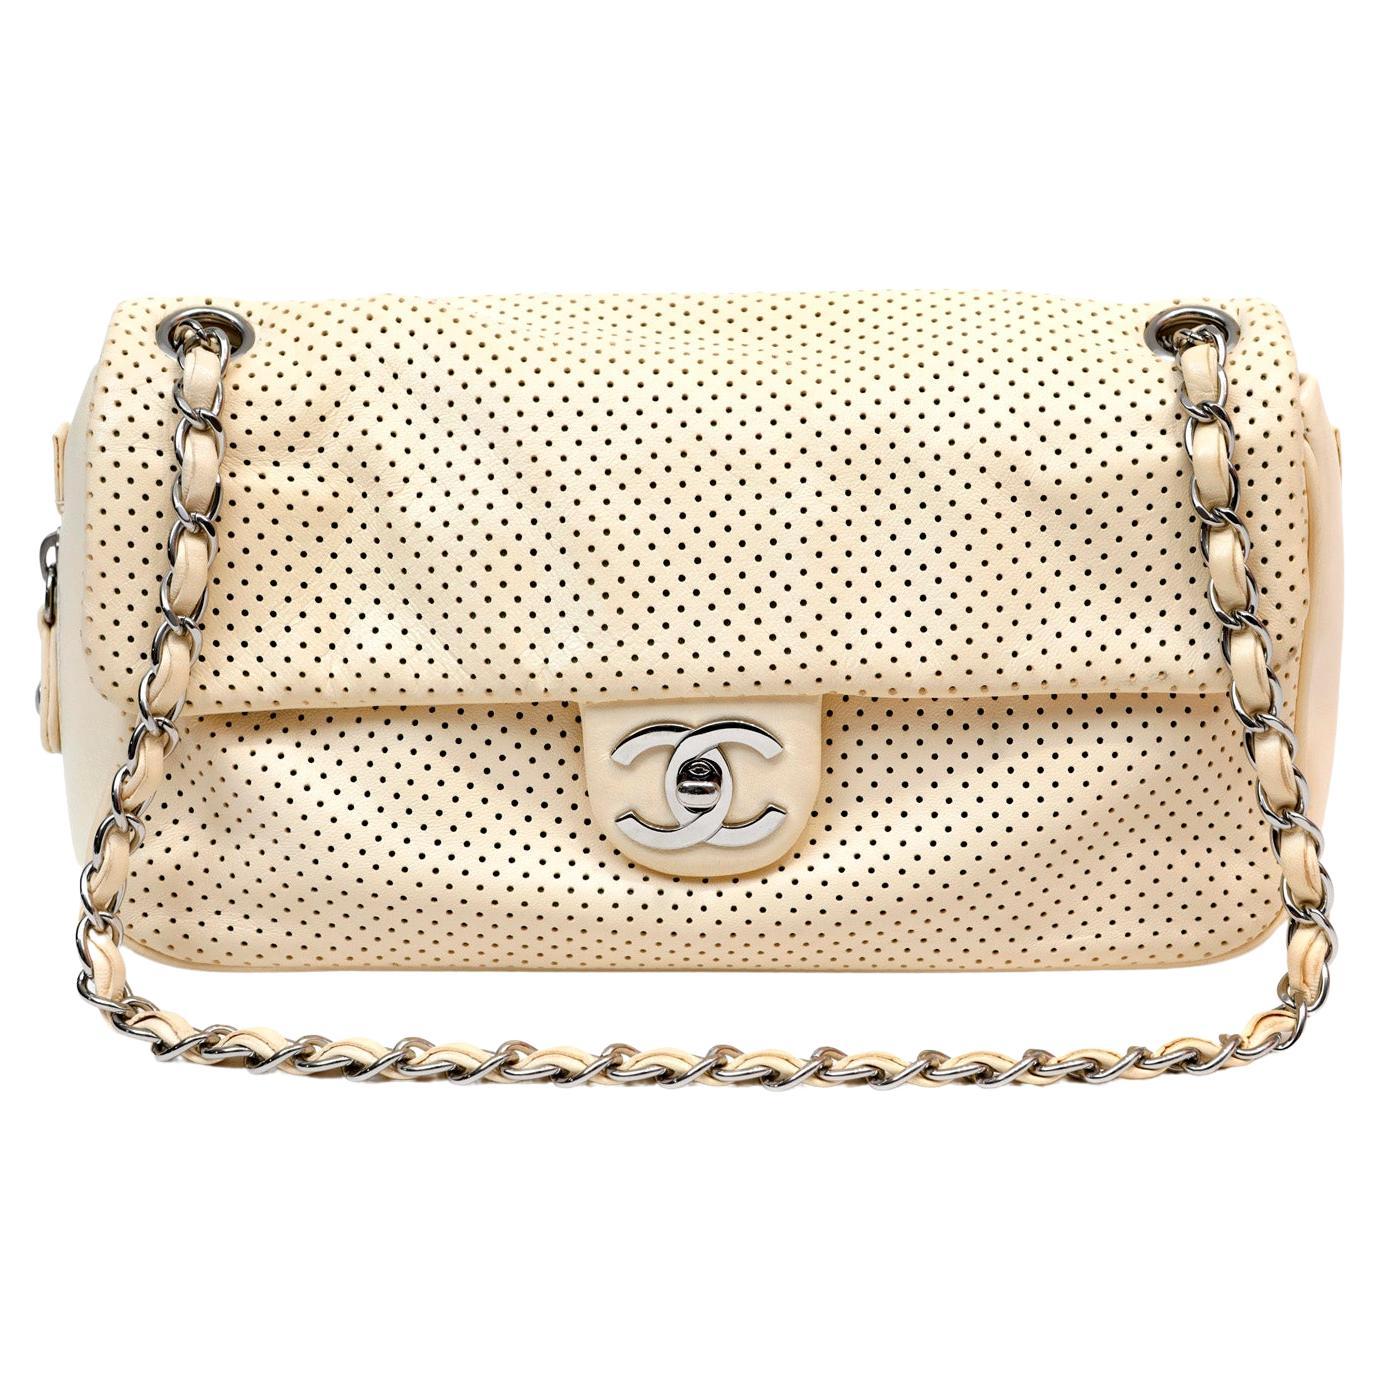 Chanel Pale Yellow Perforated Leather Baseball Spirit Flap Bag